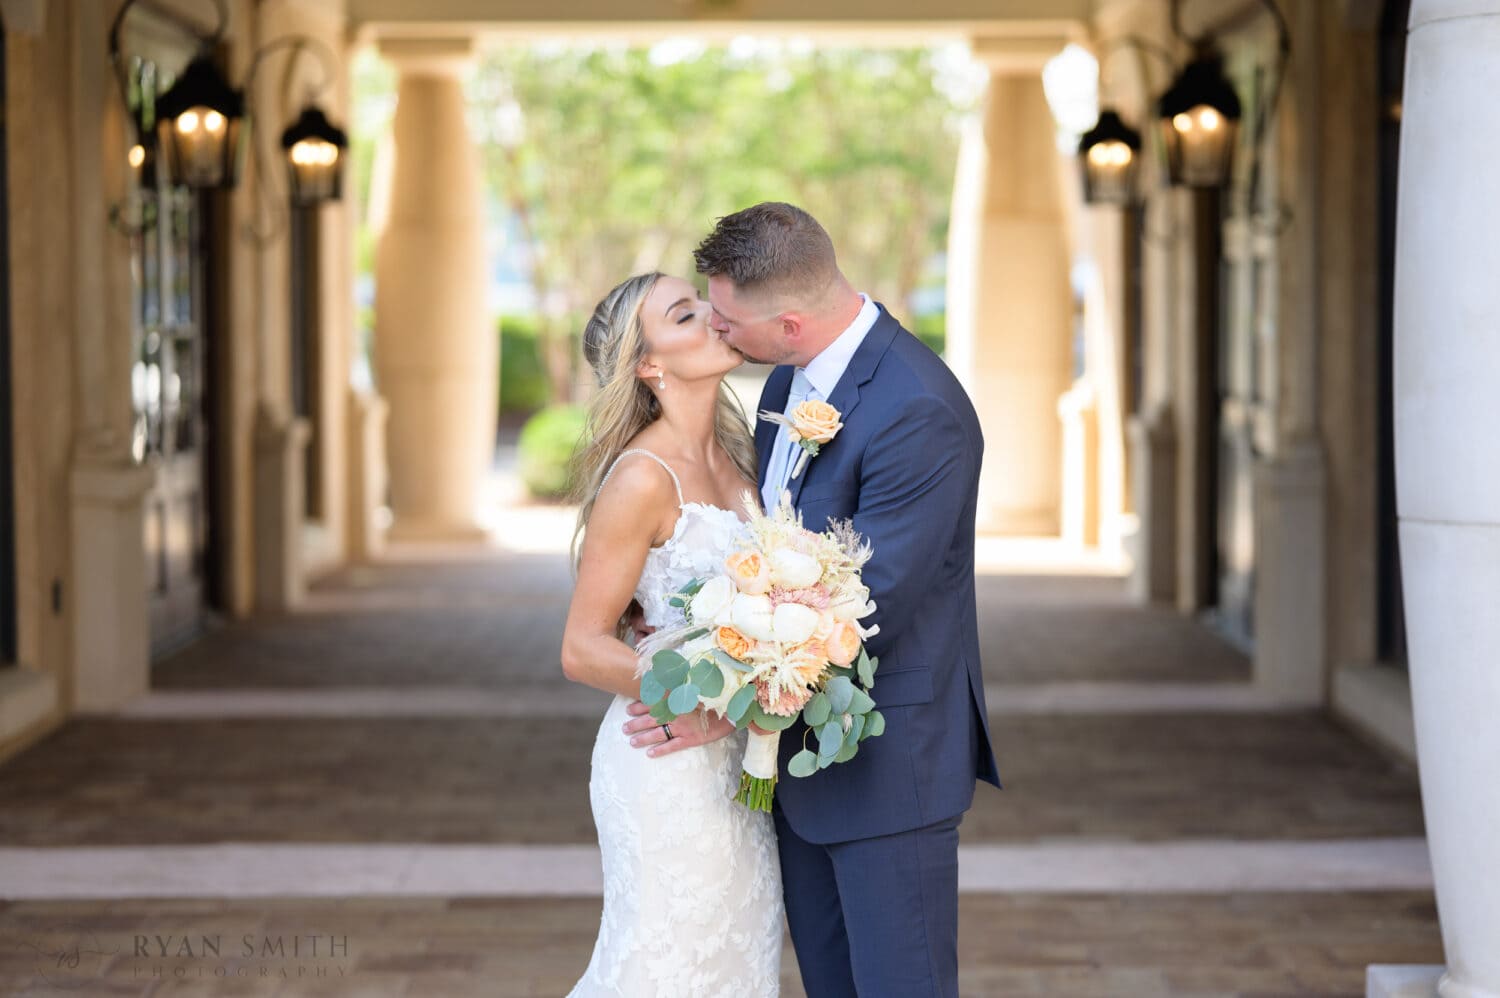 Bride and groom portraits in the shade of the courtyard walkway - 21 Main Events